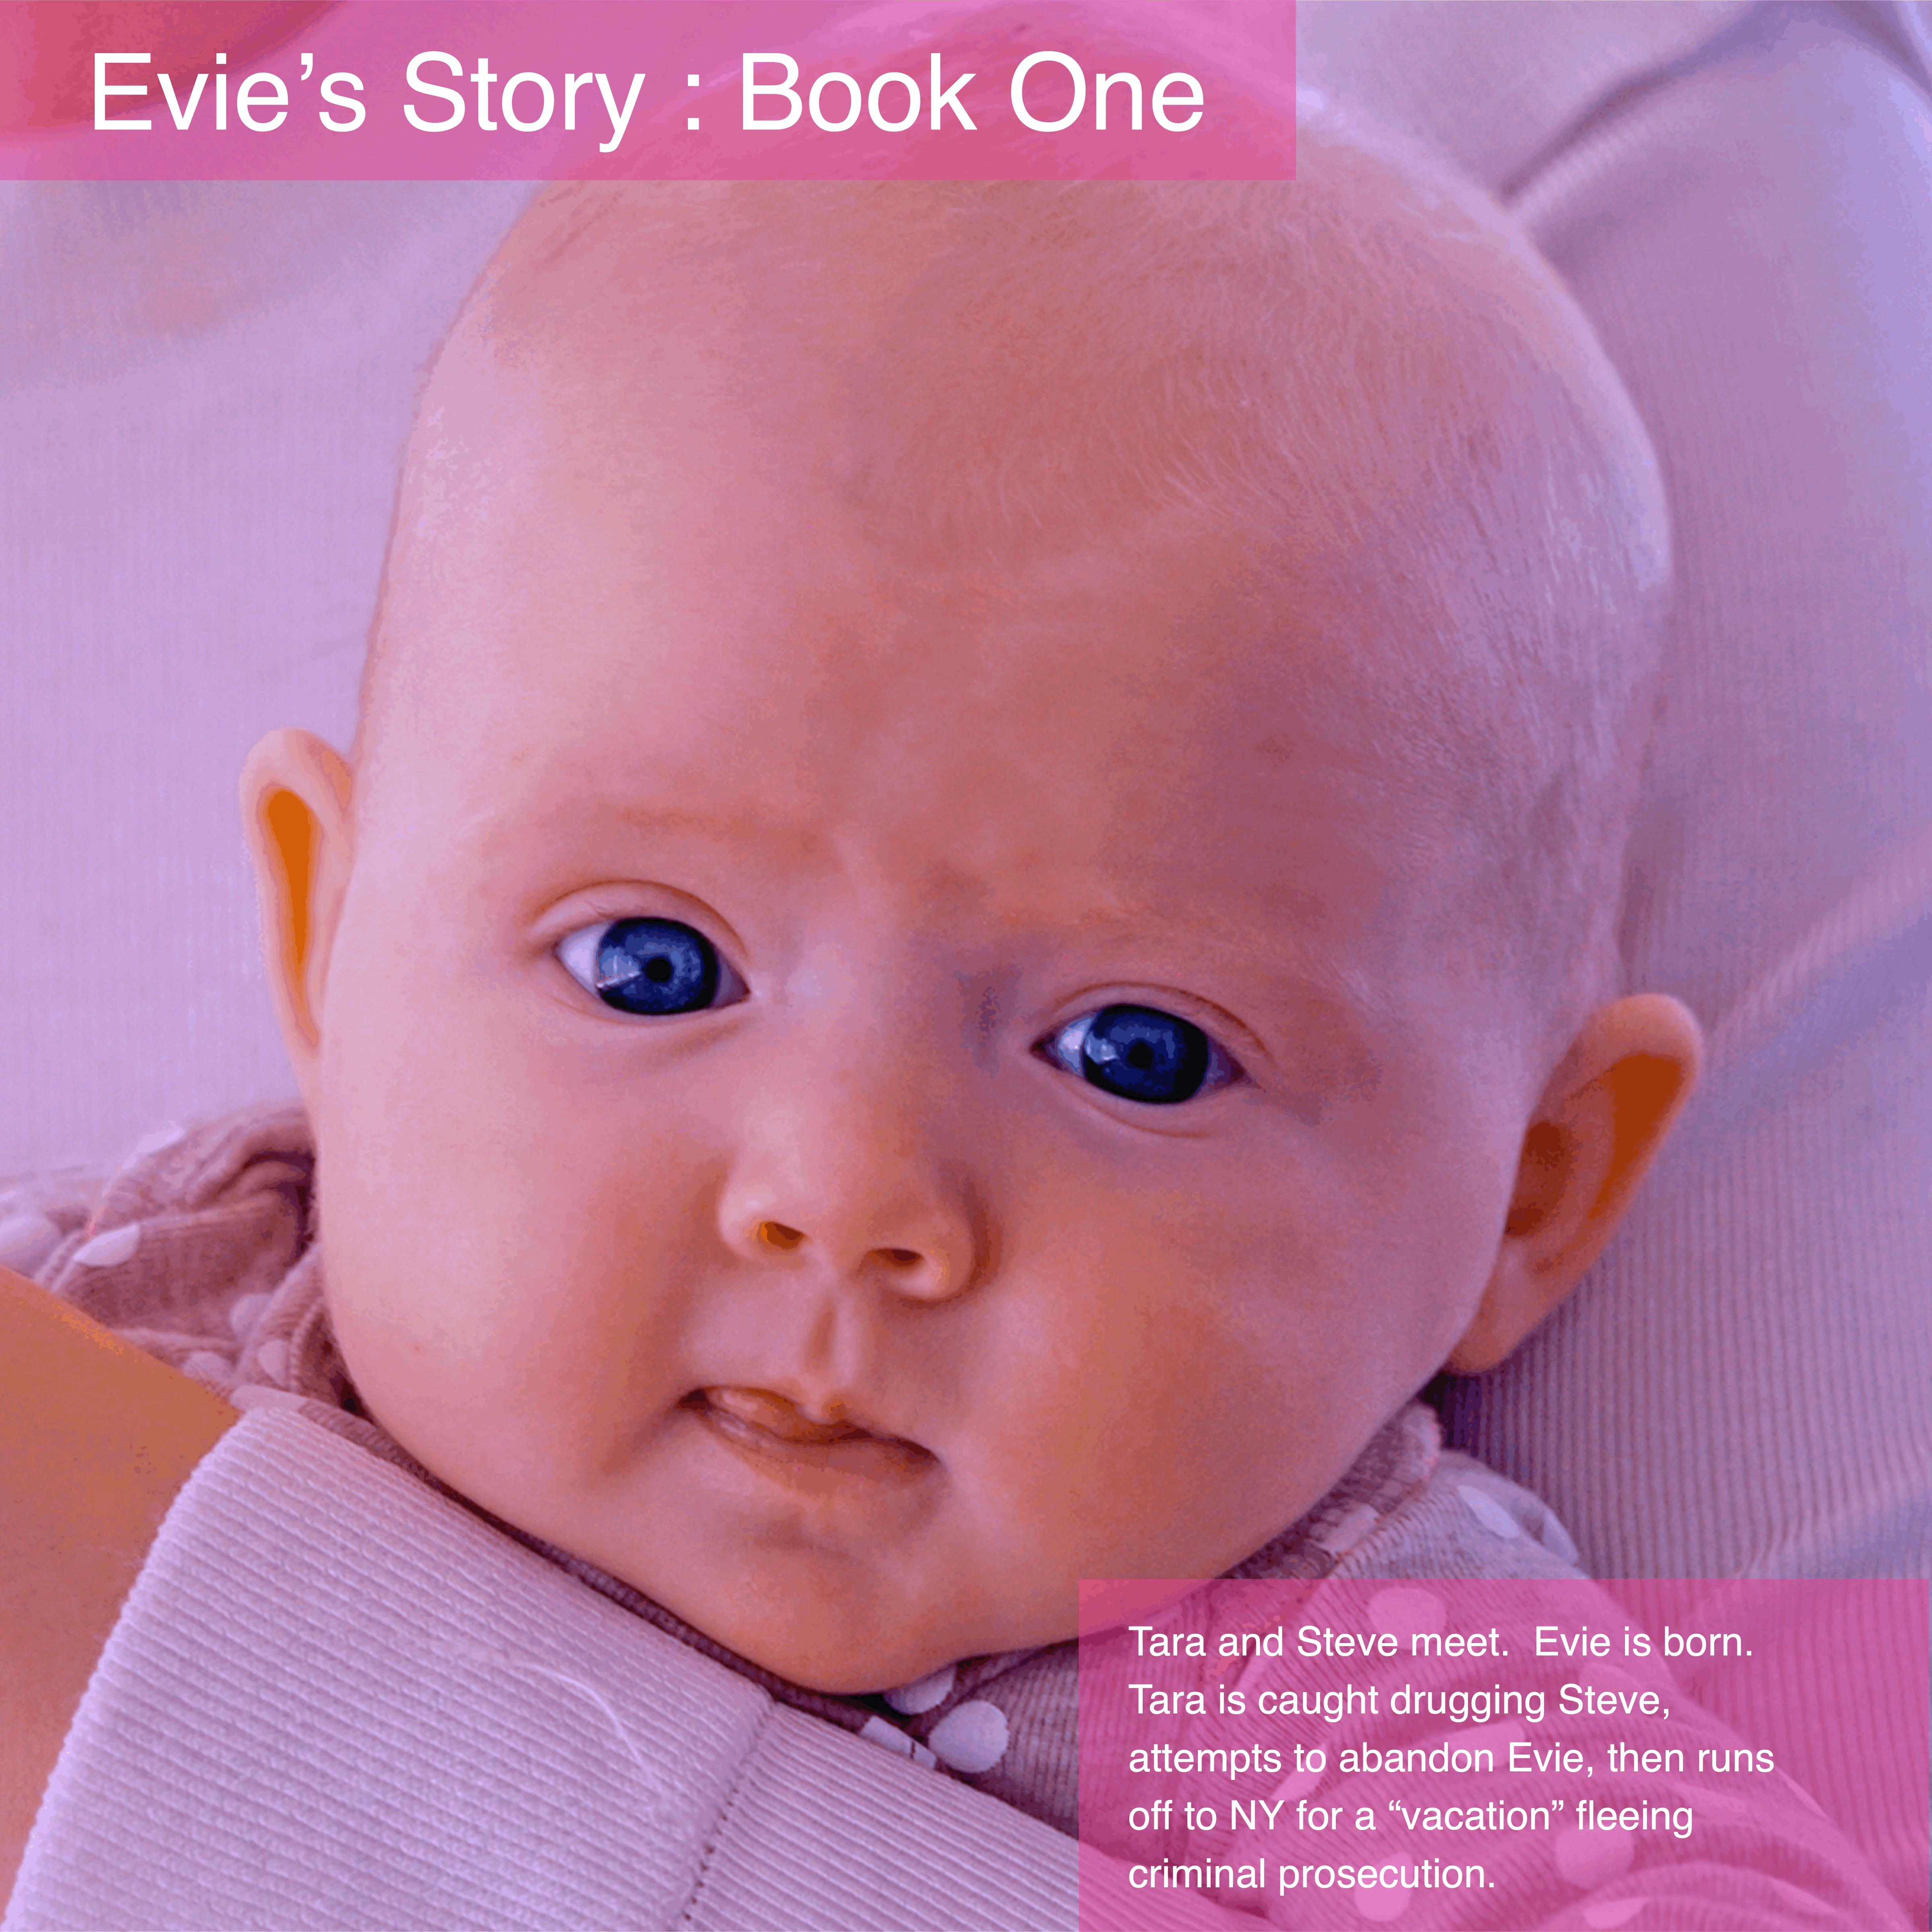 Evie's Story: The original books created by Aunt K in an effort to tell this complex story